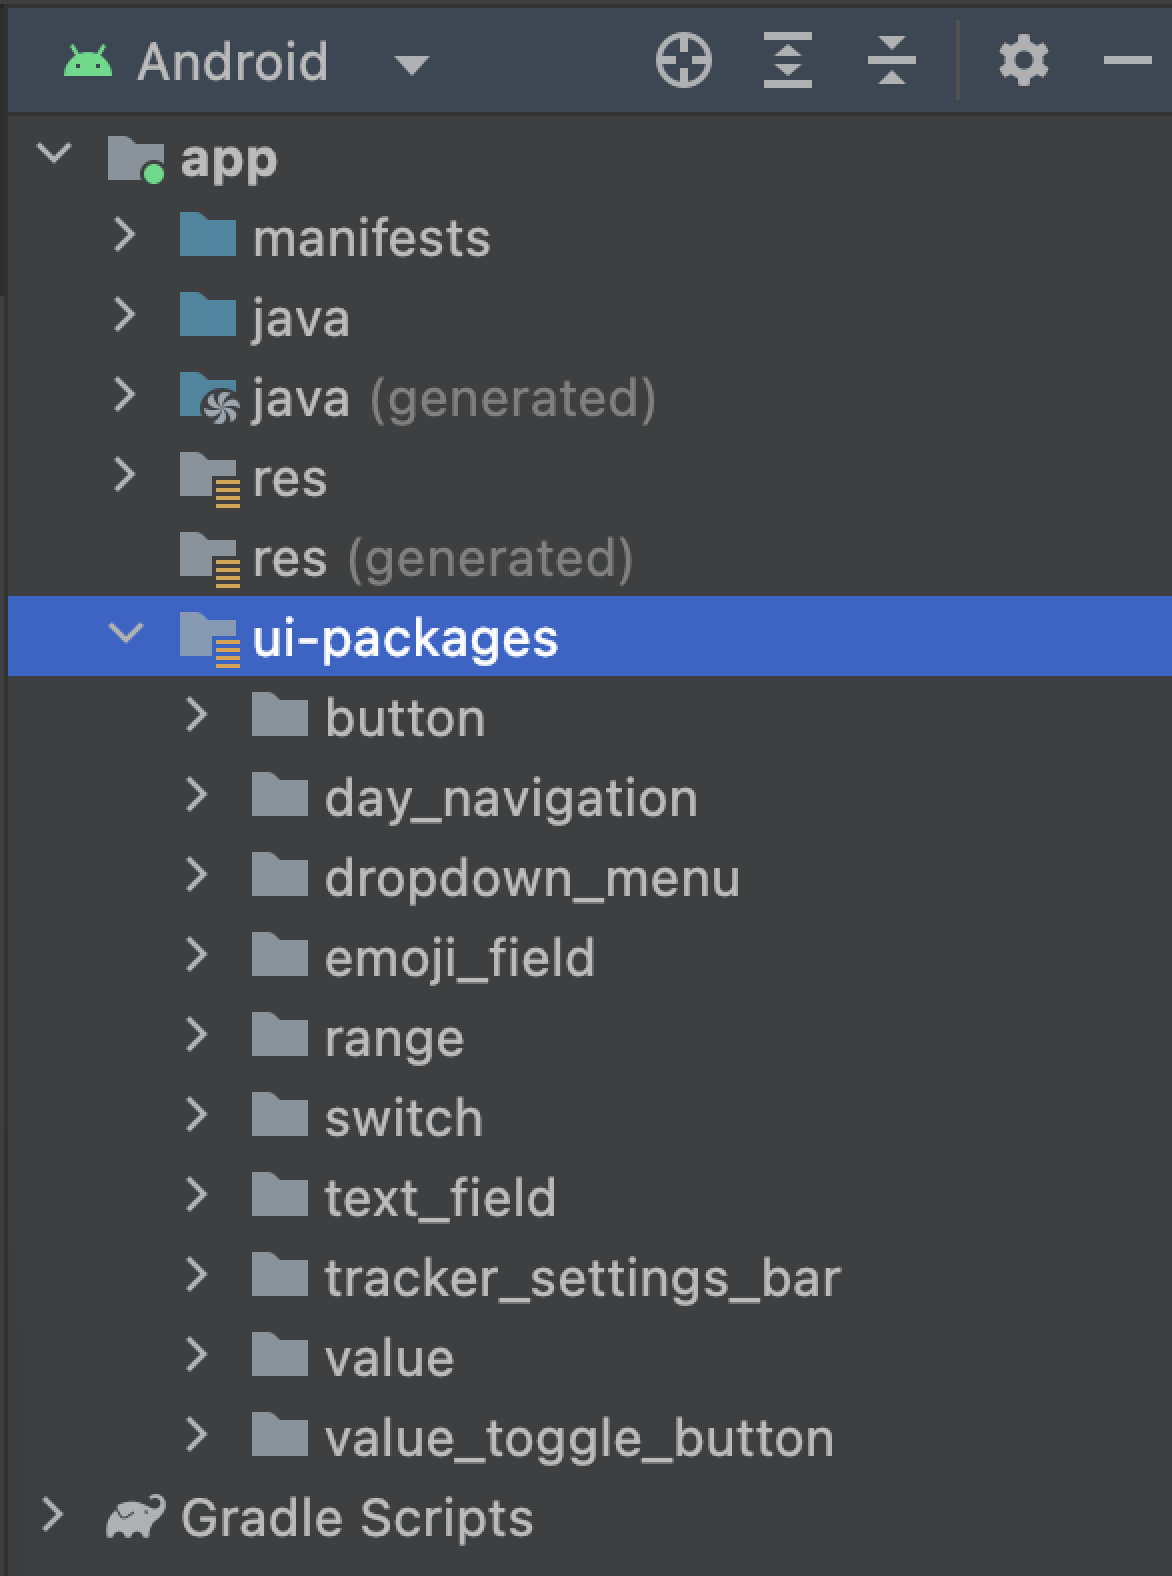 Dossier "ui-packages"